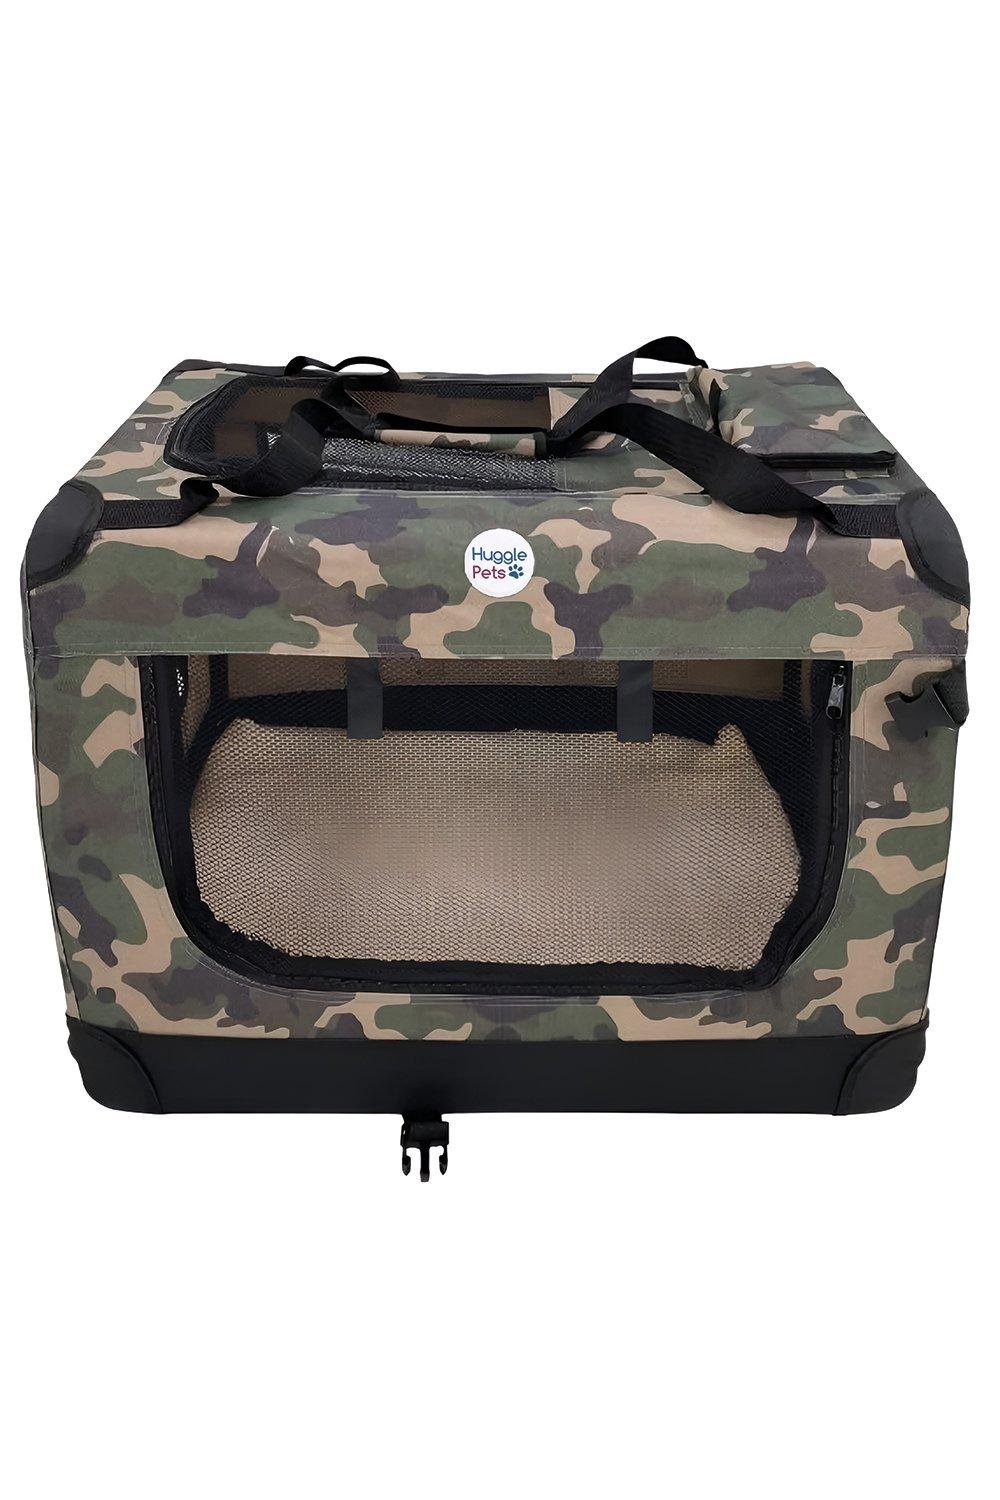 Fabric Crate Foldable Pet Carrier